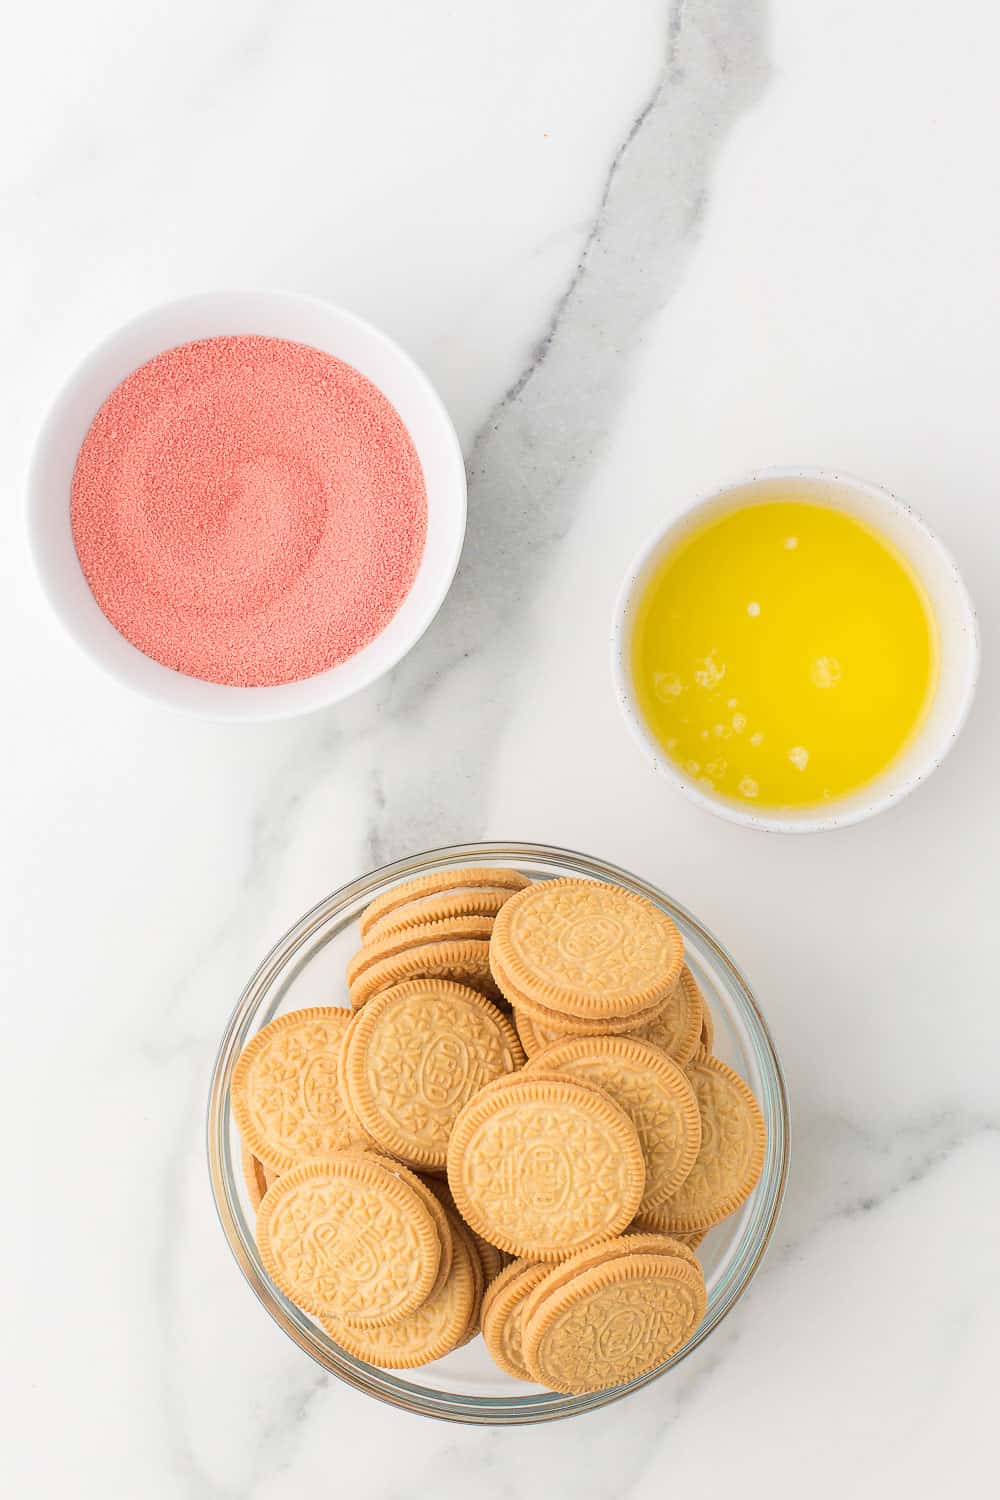 golden oreos, strawberry jello powder, and melted butter in bowls